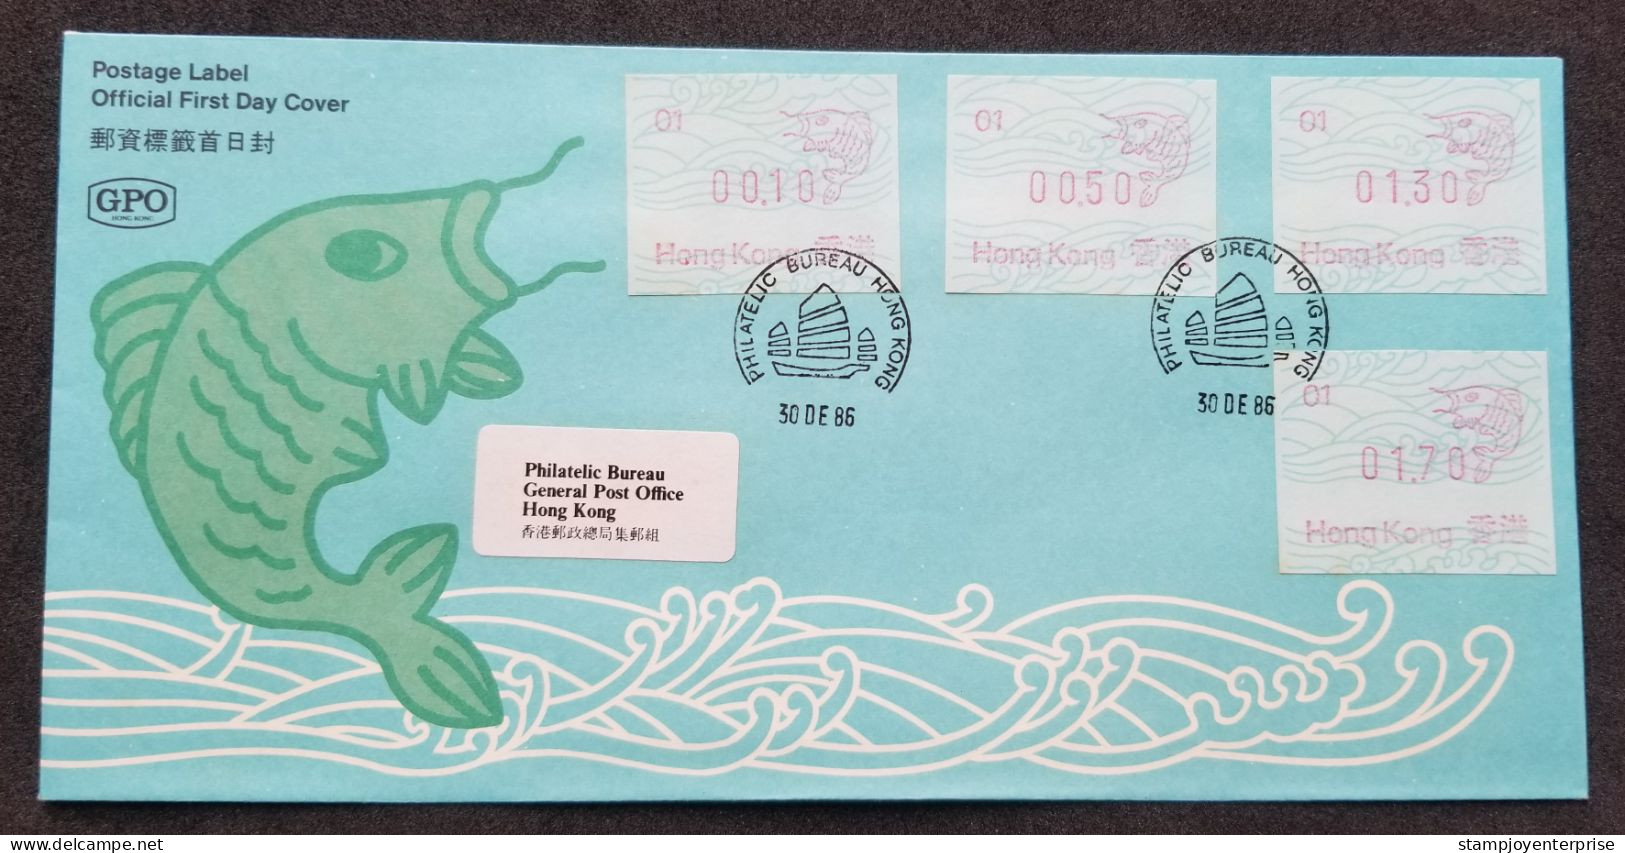 Hong Kong Frama Machine Frame Label Fish 1986 Marine (ATM FDC) *see Scan - Lettres & Documents